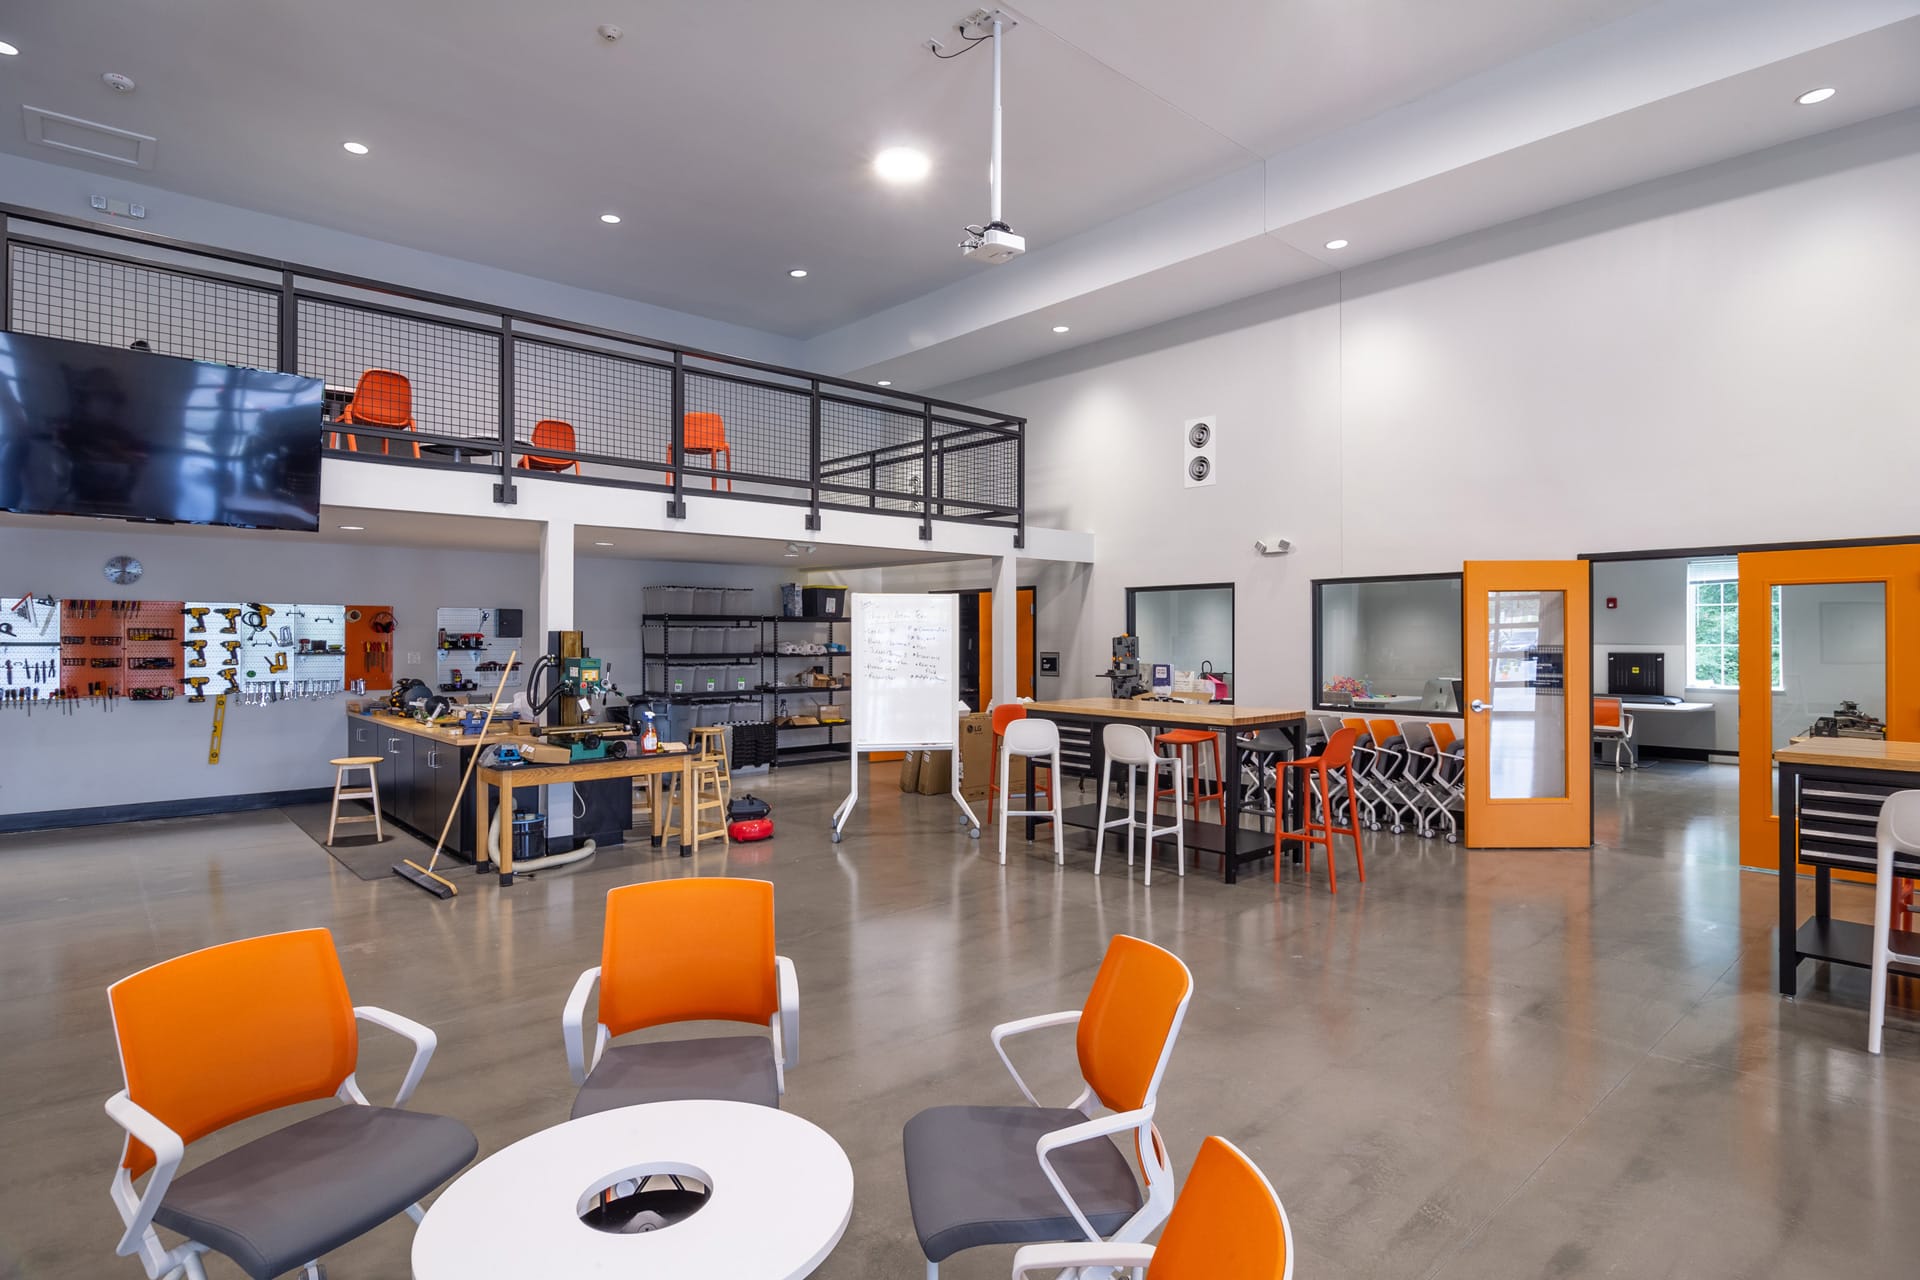 Featured image for “Fader Innovation Center at McDonogh School”